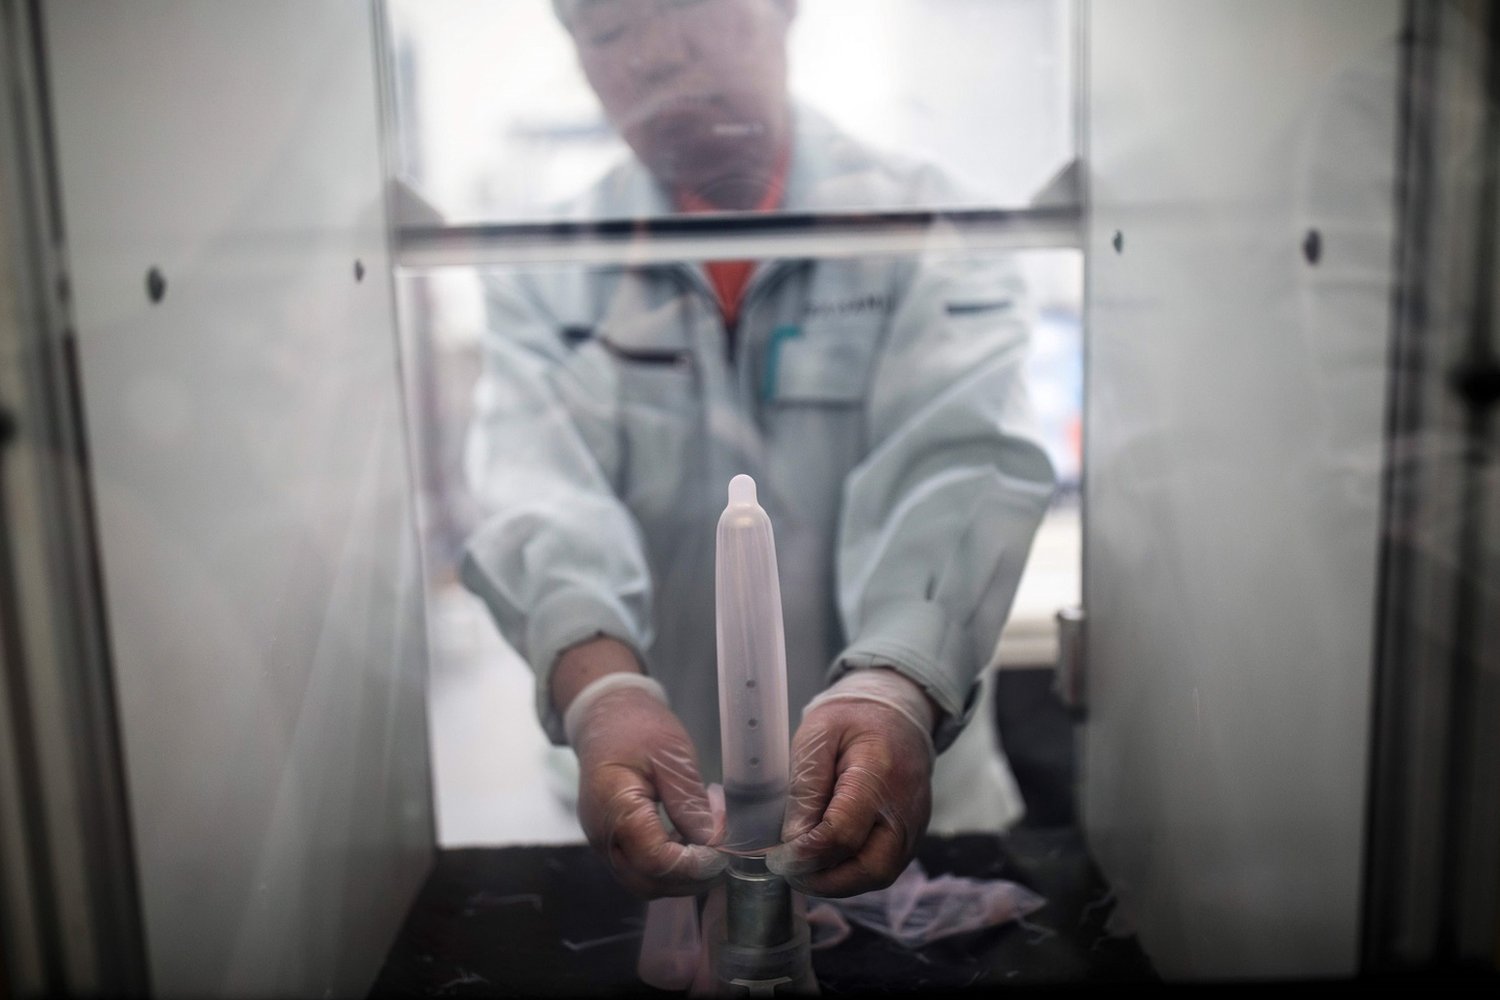 An employee of Japanese condom maker Sagami Rubber Industries puts a condom in a machine to test its endurance by filling it with air